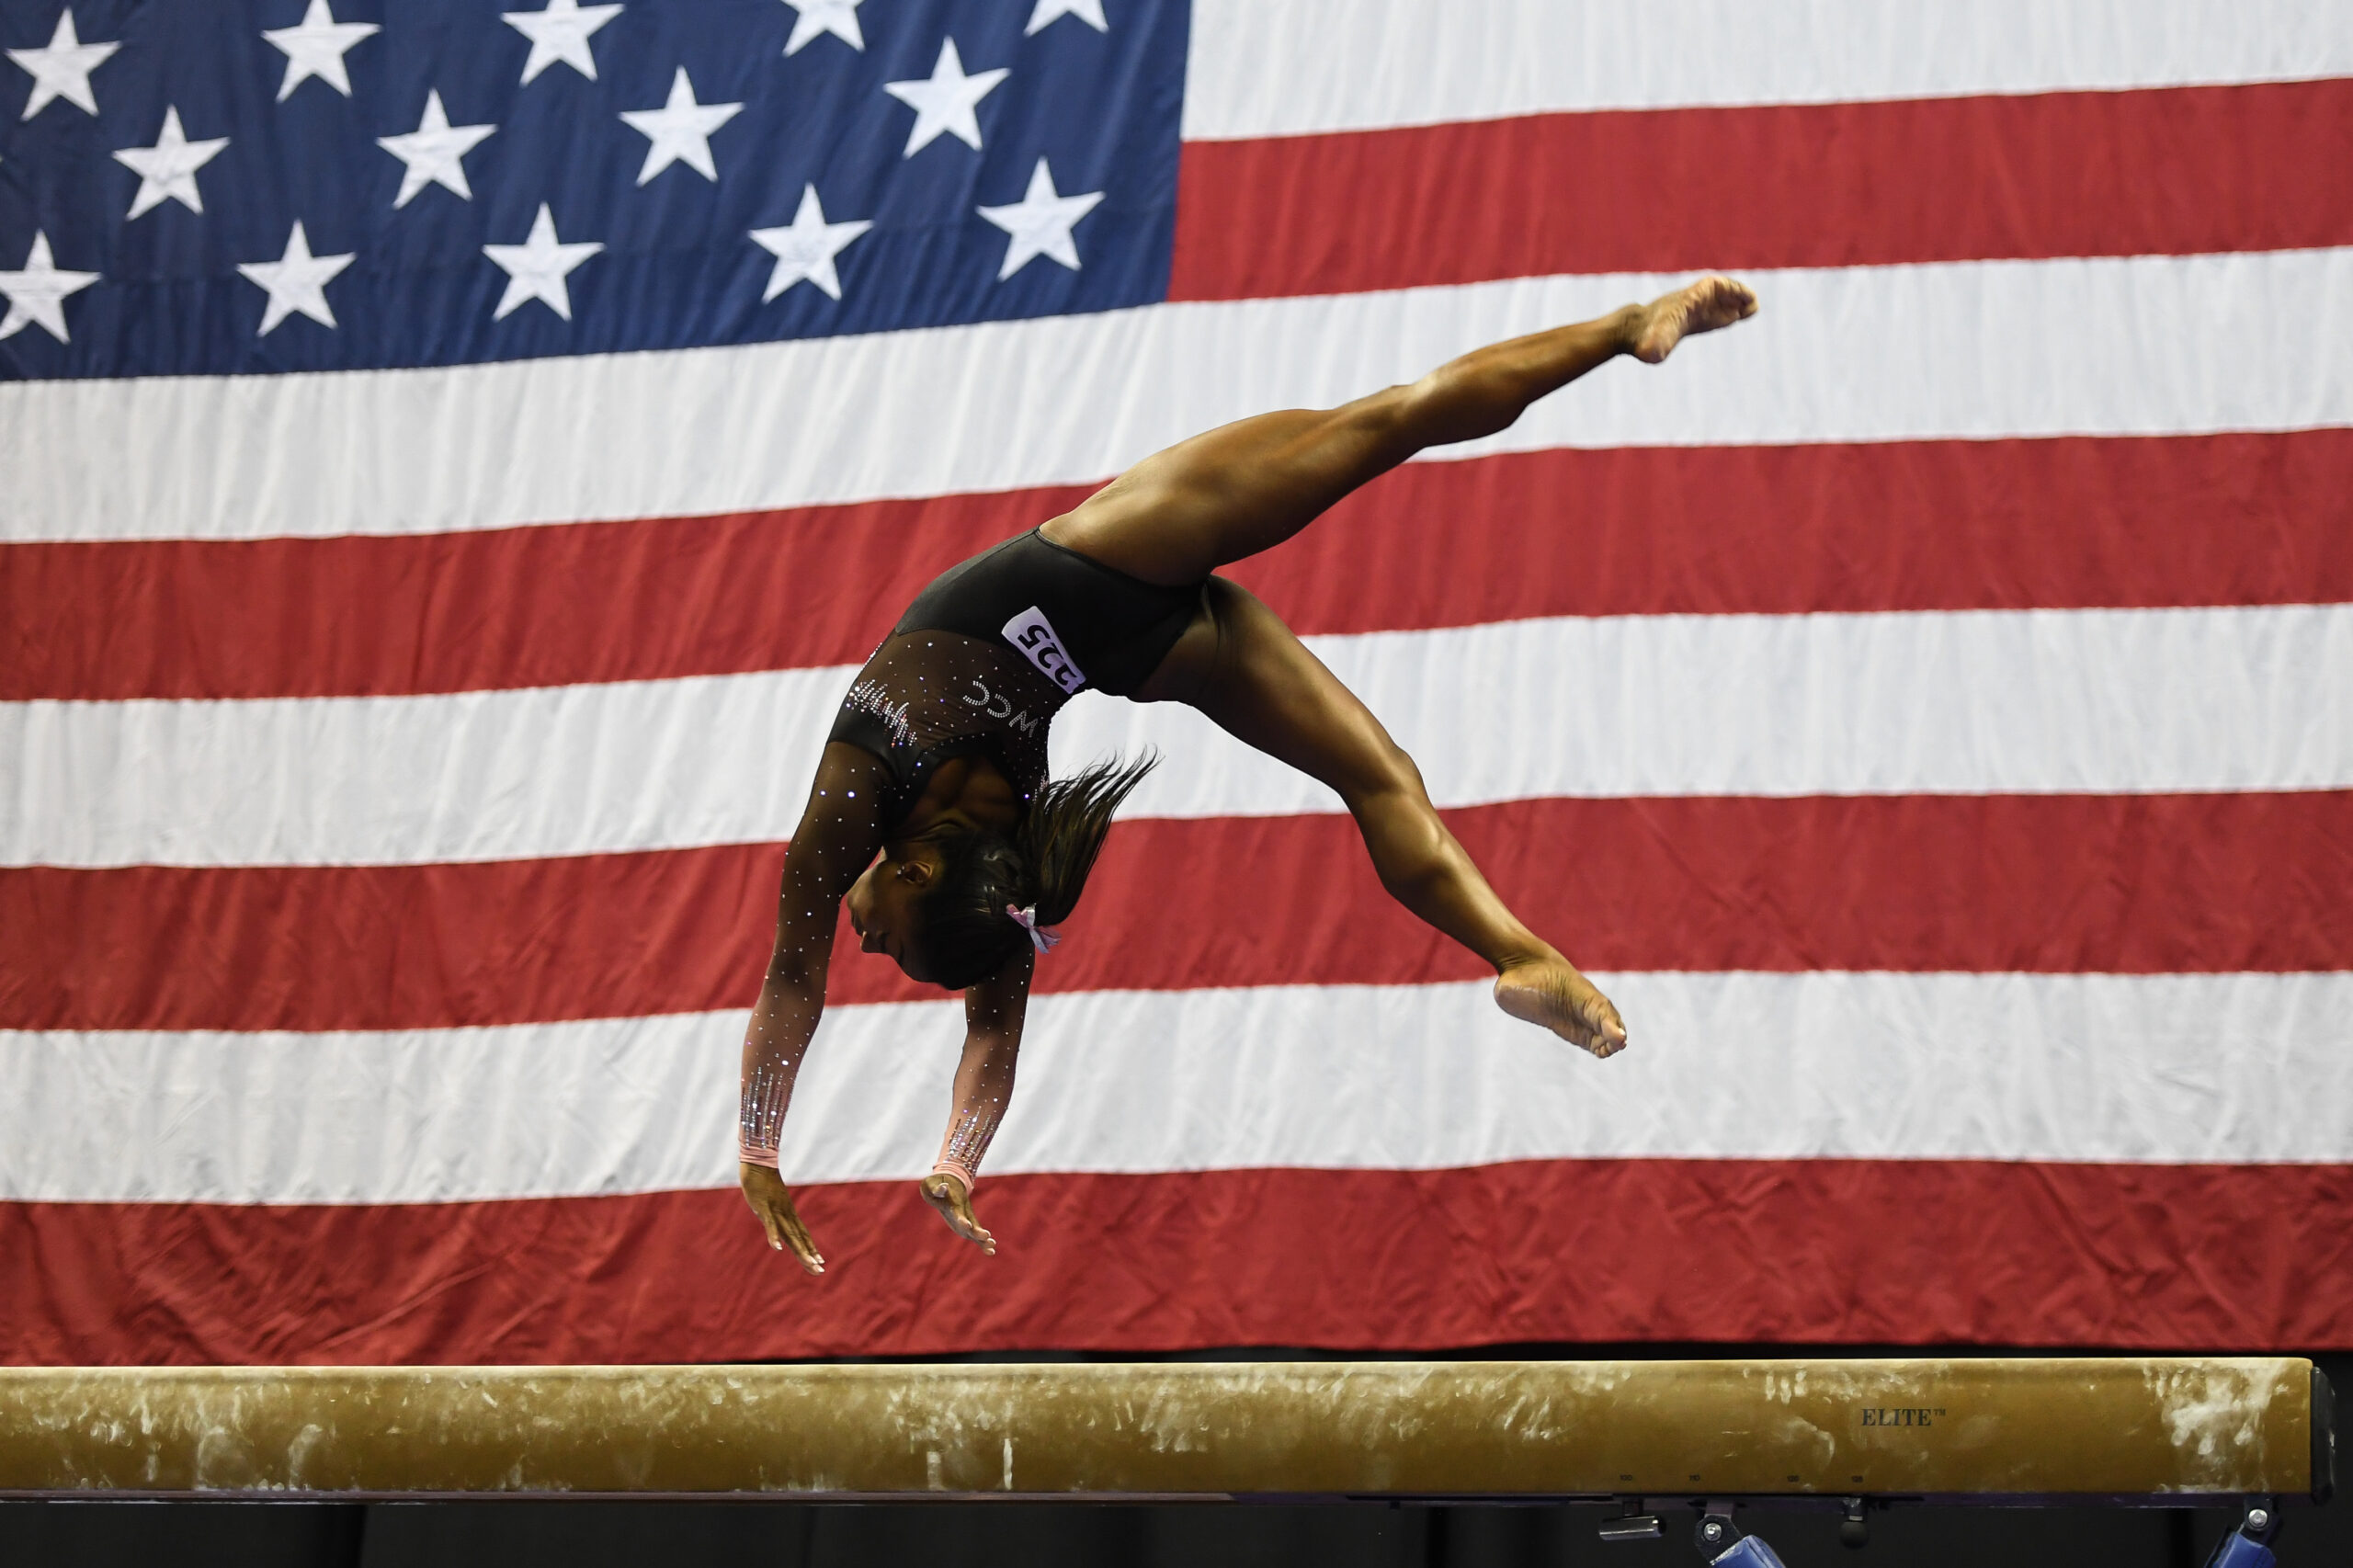 Simone Biles competes on beam during Day 2 of the 2019 U.S. Gymnastics Championships.